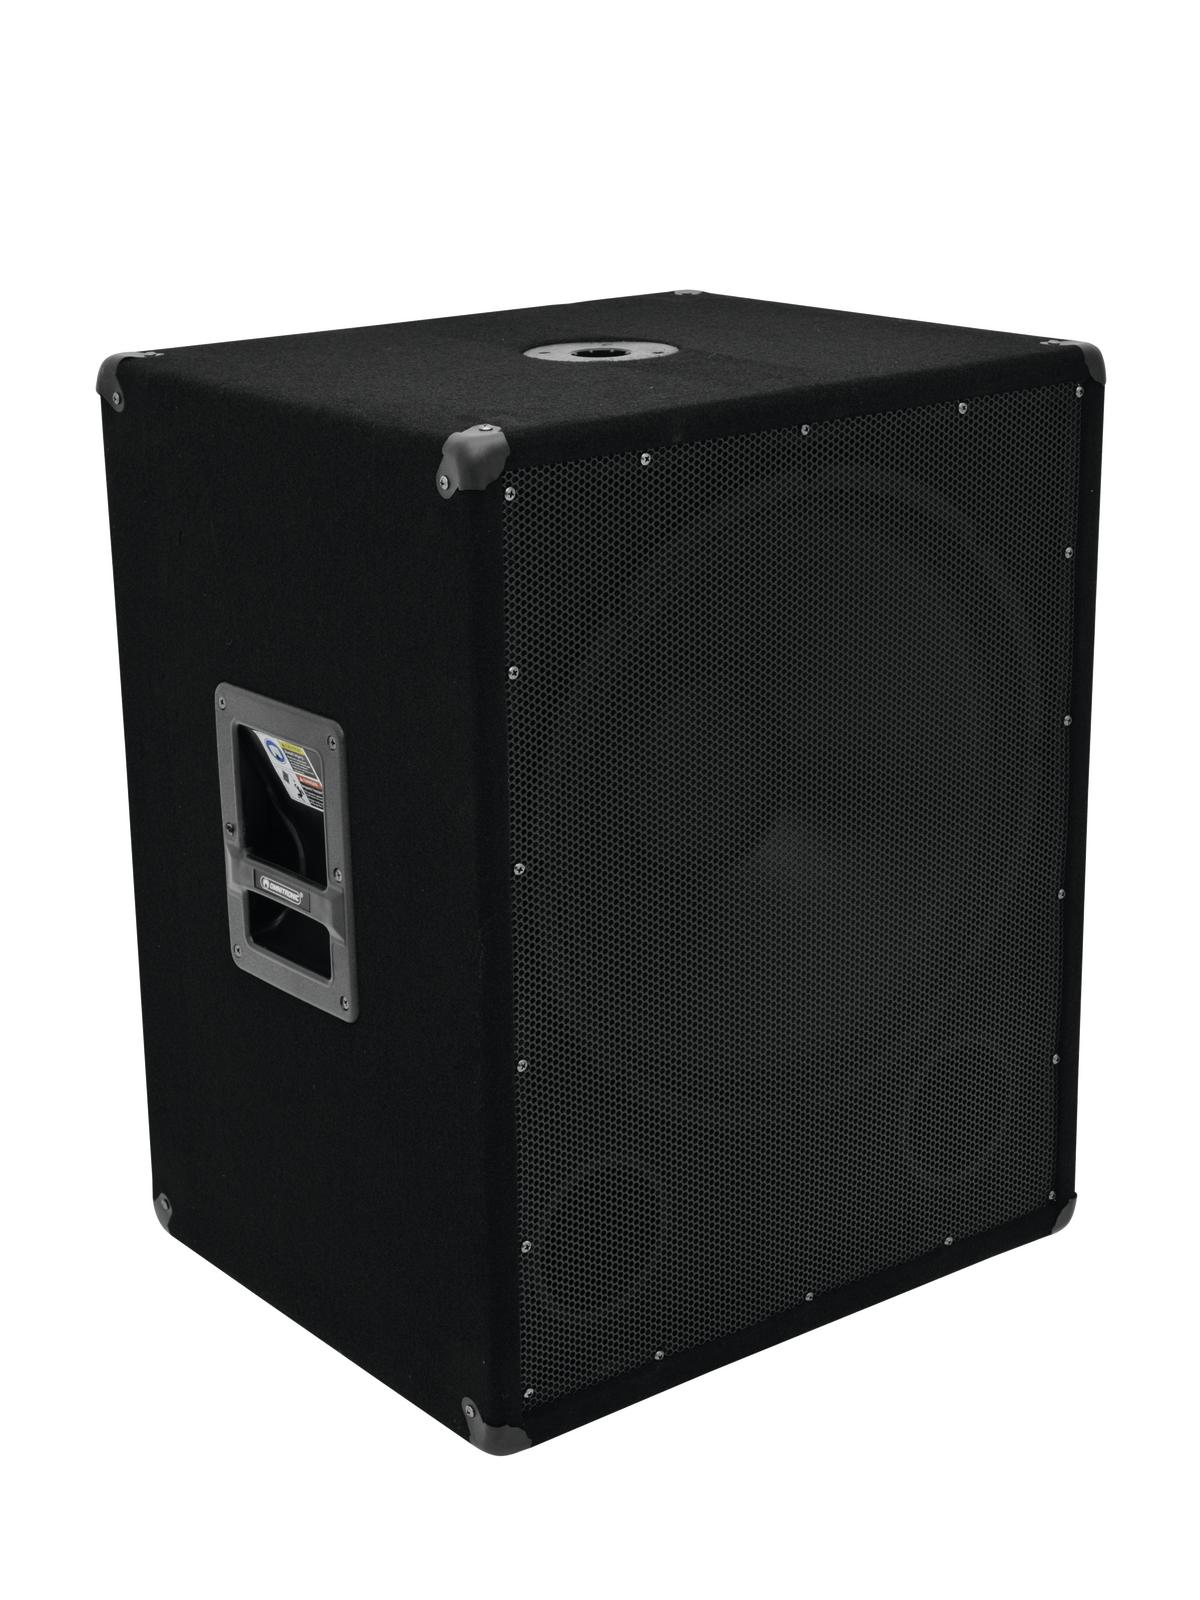 18“ subwoofer 600 W RMS